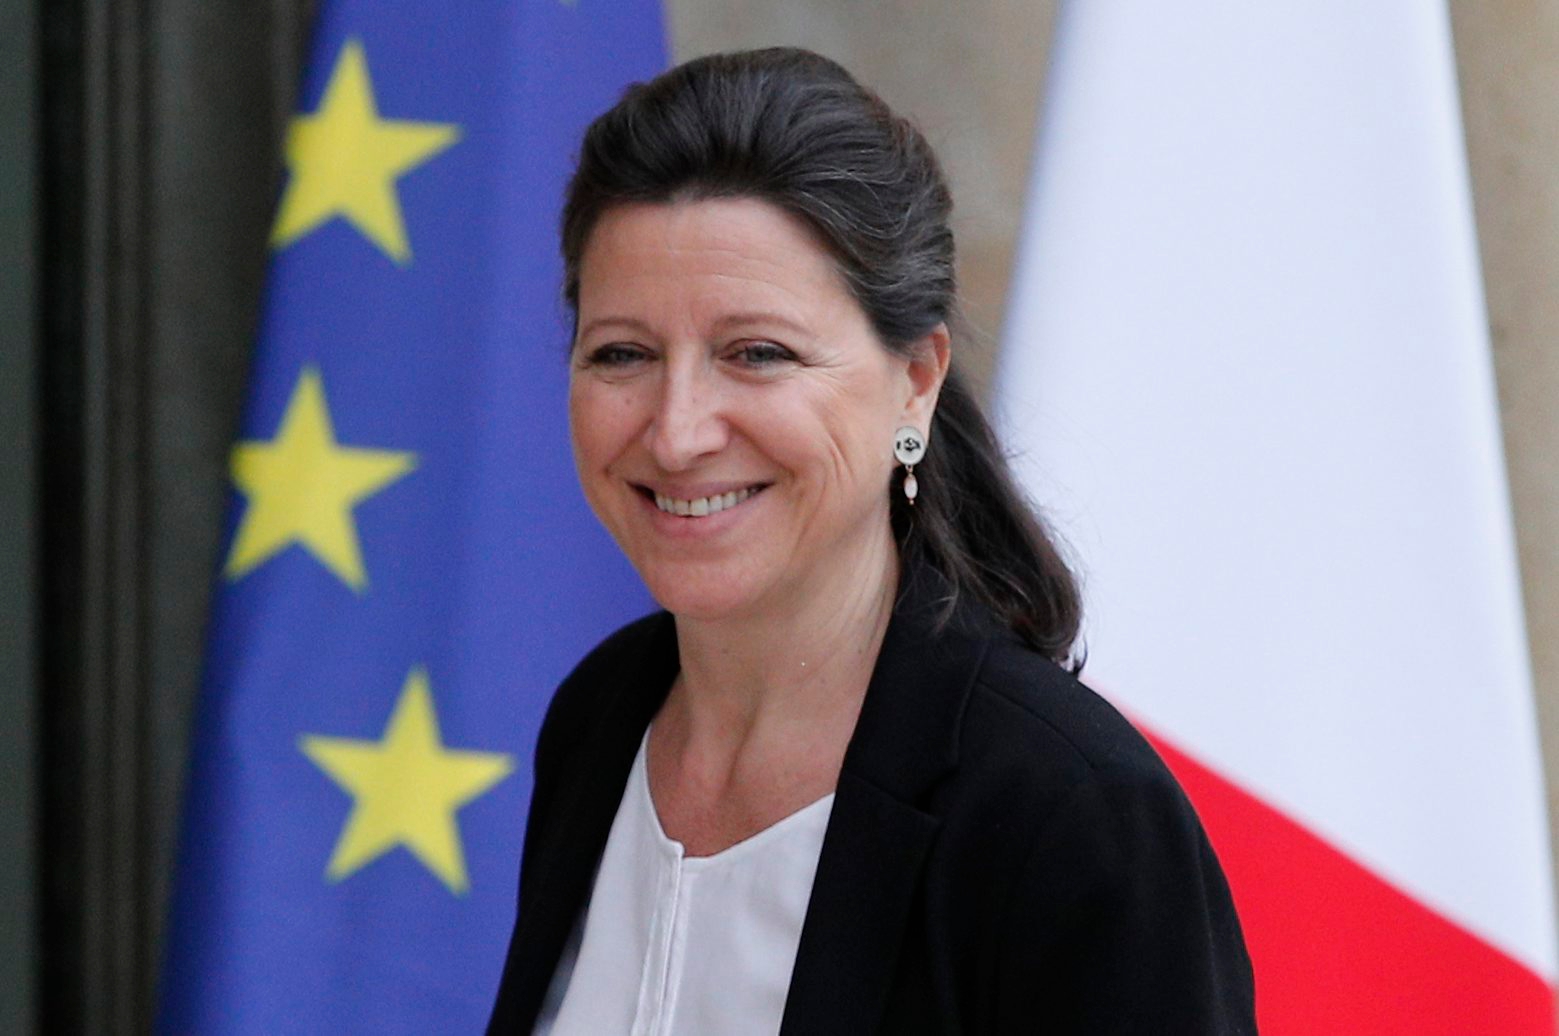 New French Health and Solidarity Minister Agnes Buzyn arrives for the first weekly cabinet meeting under new French President Emmanuel Macron, Thursday, May 18, 2017 at the Elysee Palace in Paris. Macron named a mix of prominent and unknown figures from the left and the right to make up the government. (AP Photo/Christophe Ena) FRANCE PRESIDENT